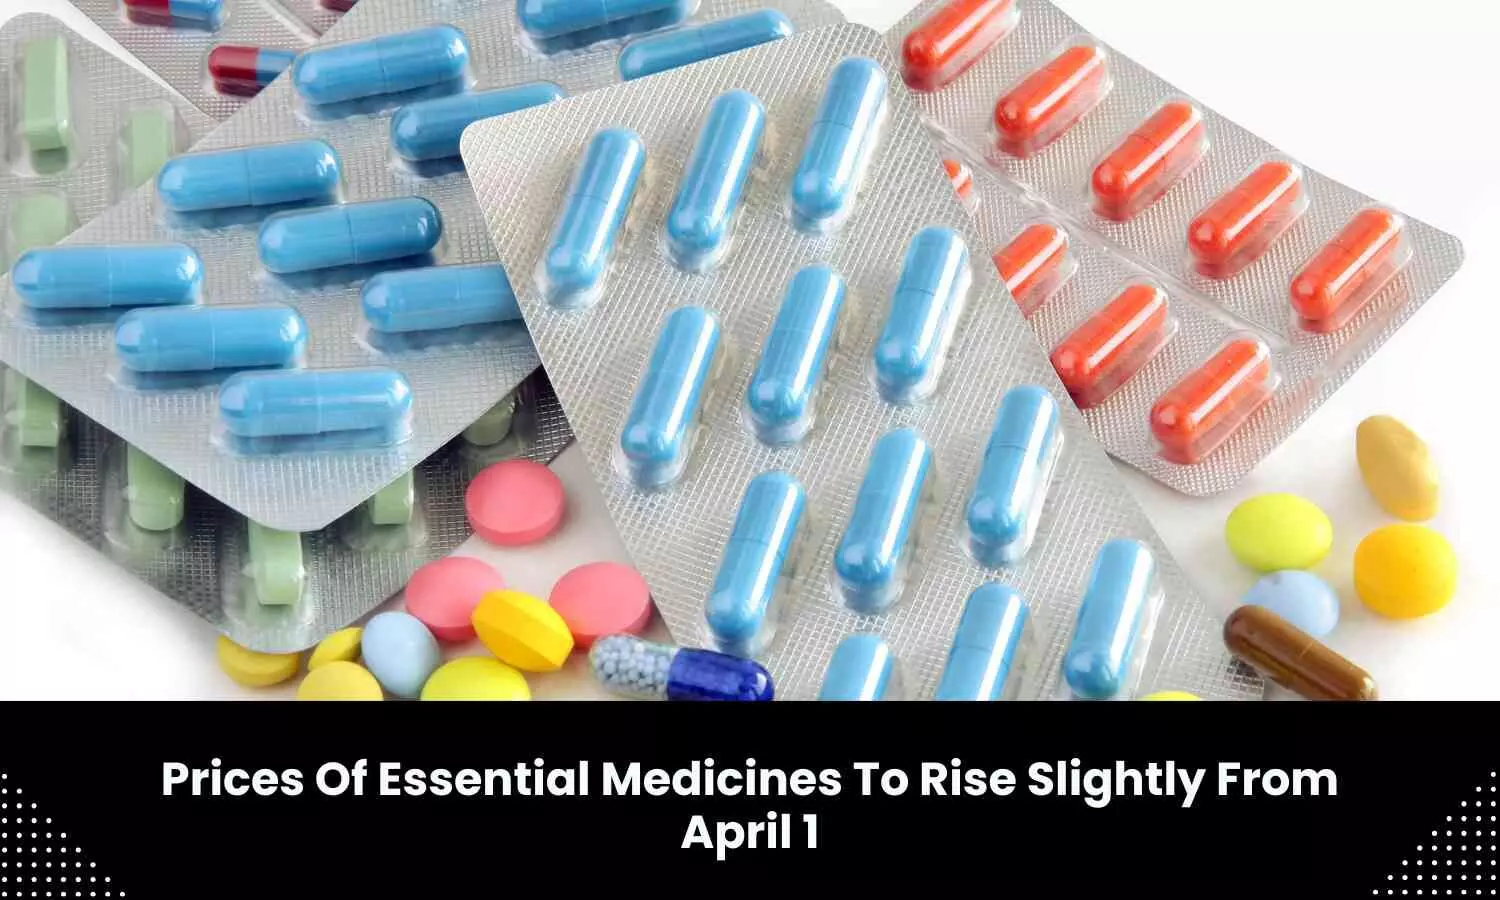 Slight hike in price of essential medicines from April 1